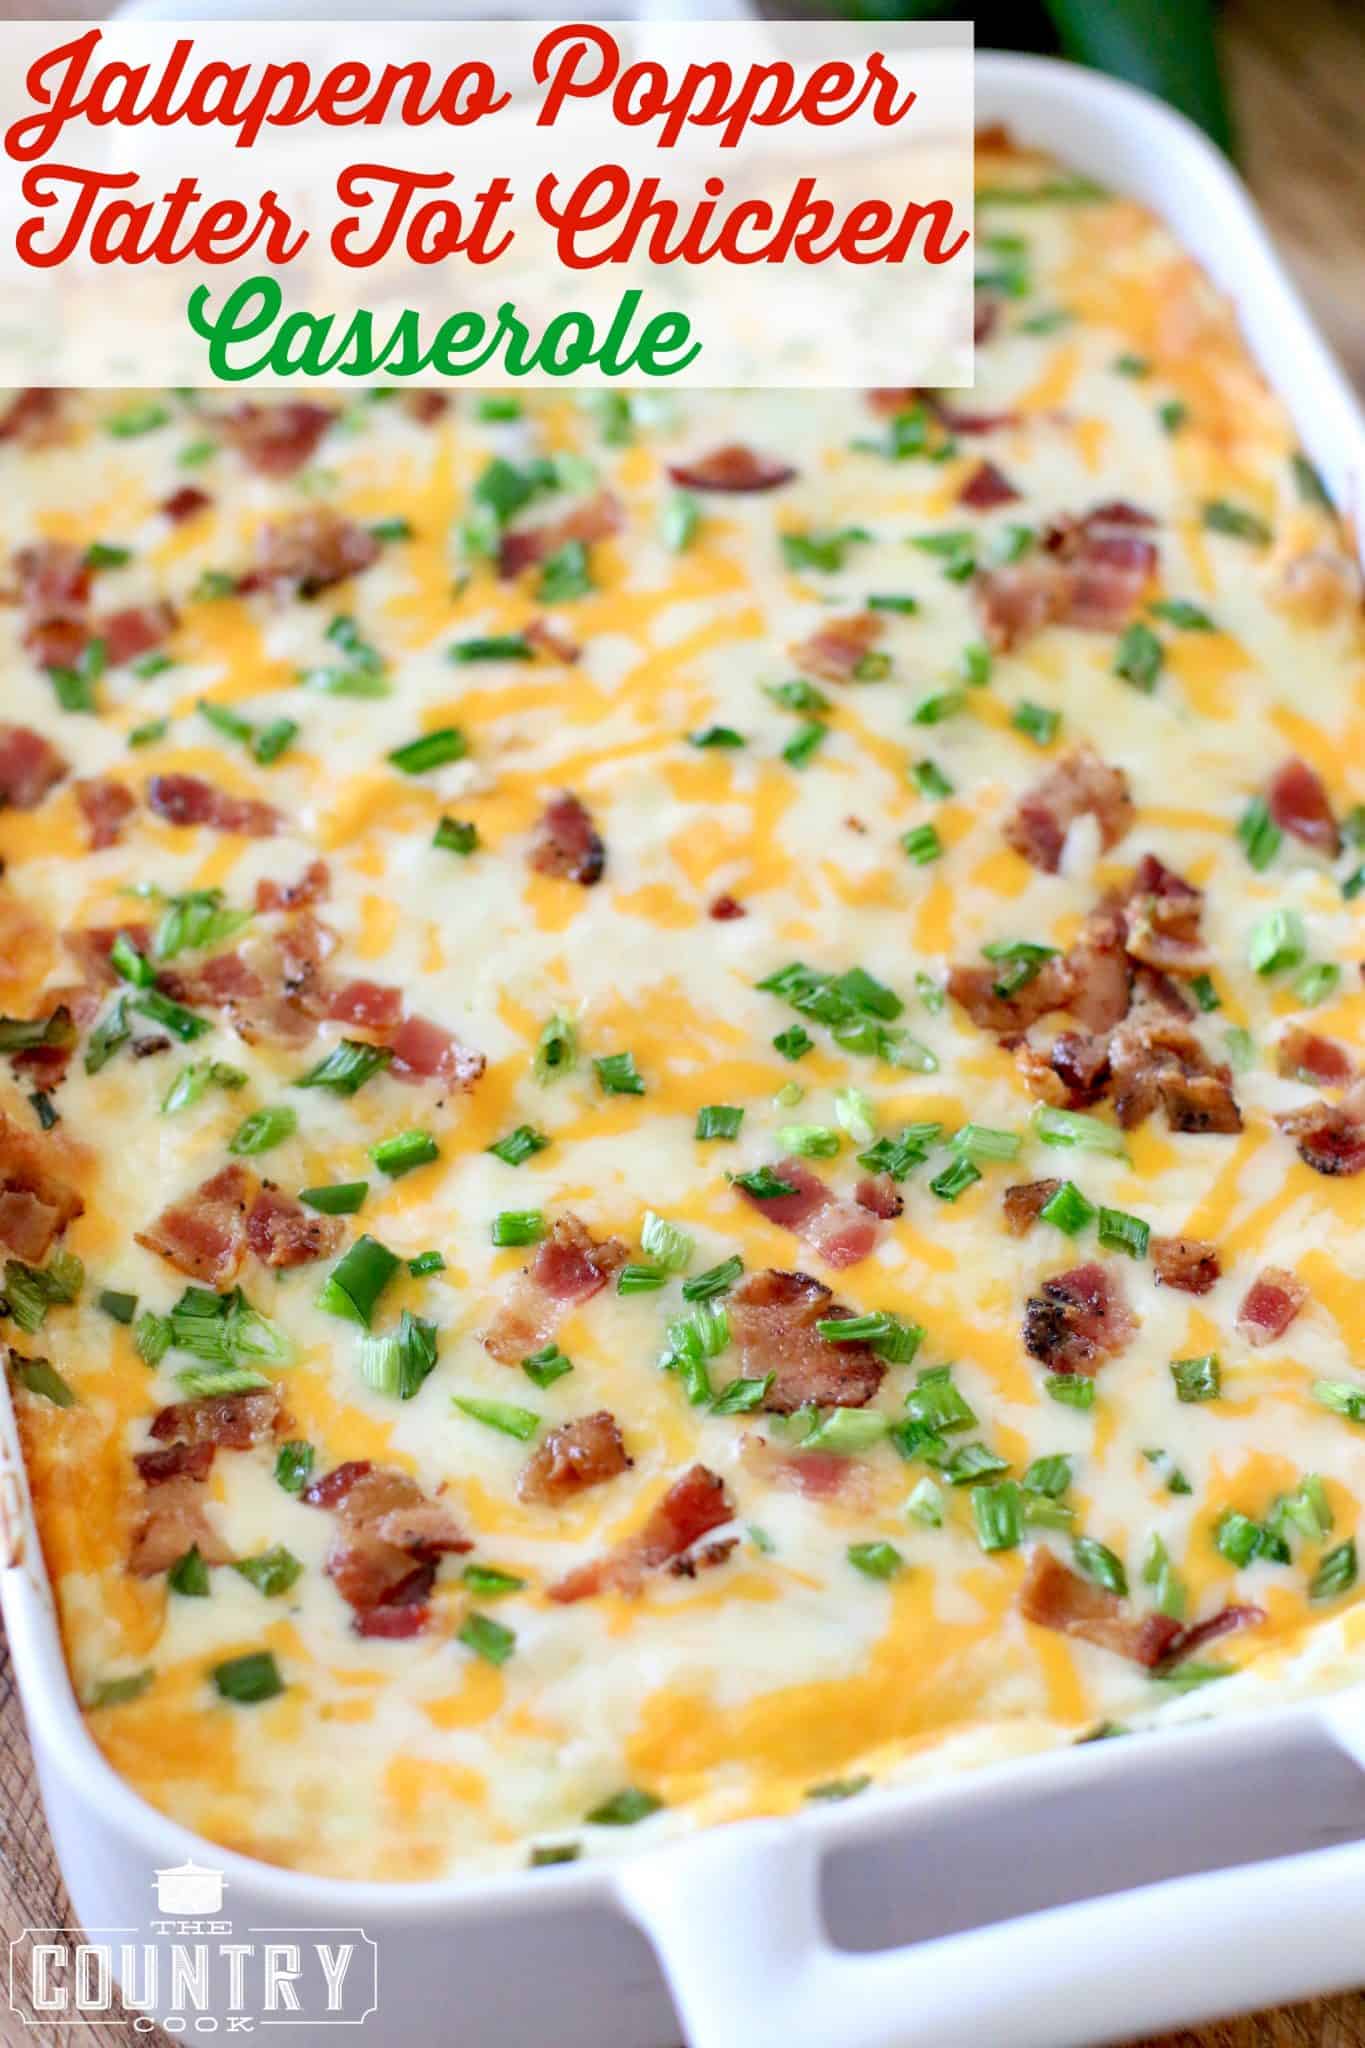 Jalapeno Popper Tater Tot Chicken Casserole shown fully baked with melted cheese in a white casserole dish.